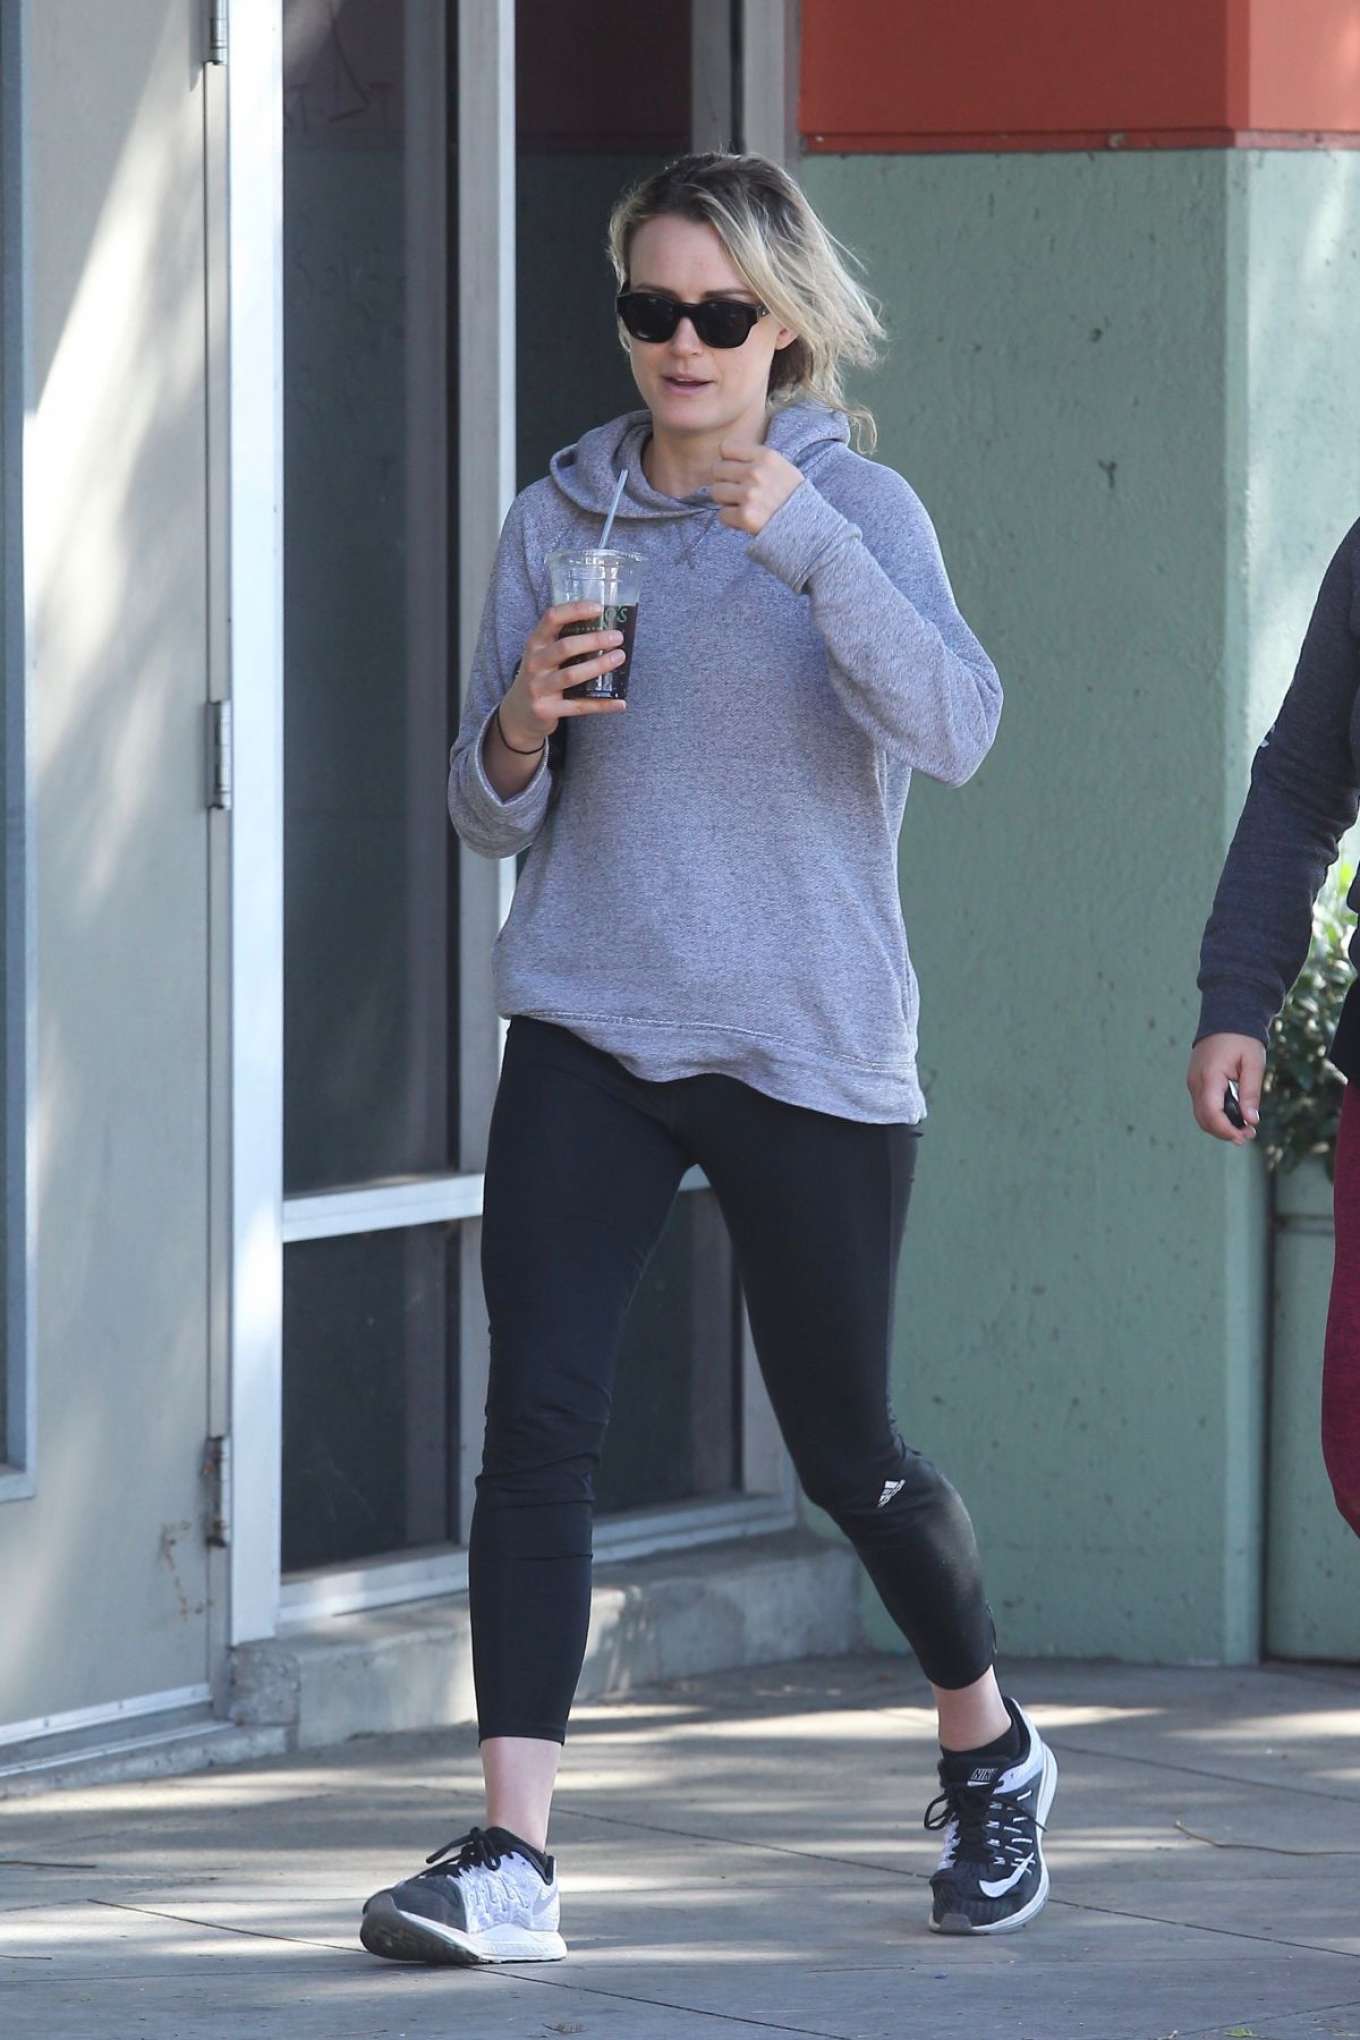 Taylor Schilling in Tights -09 | GotCeleb